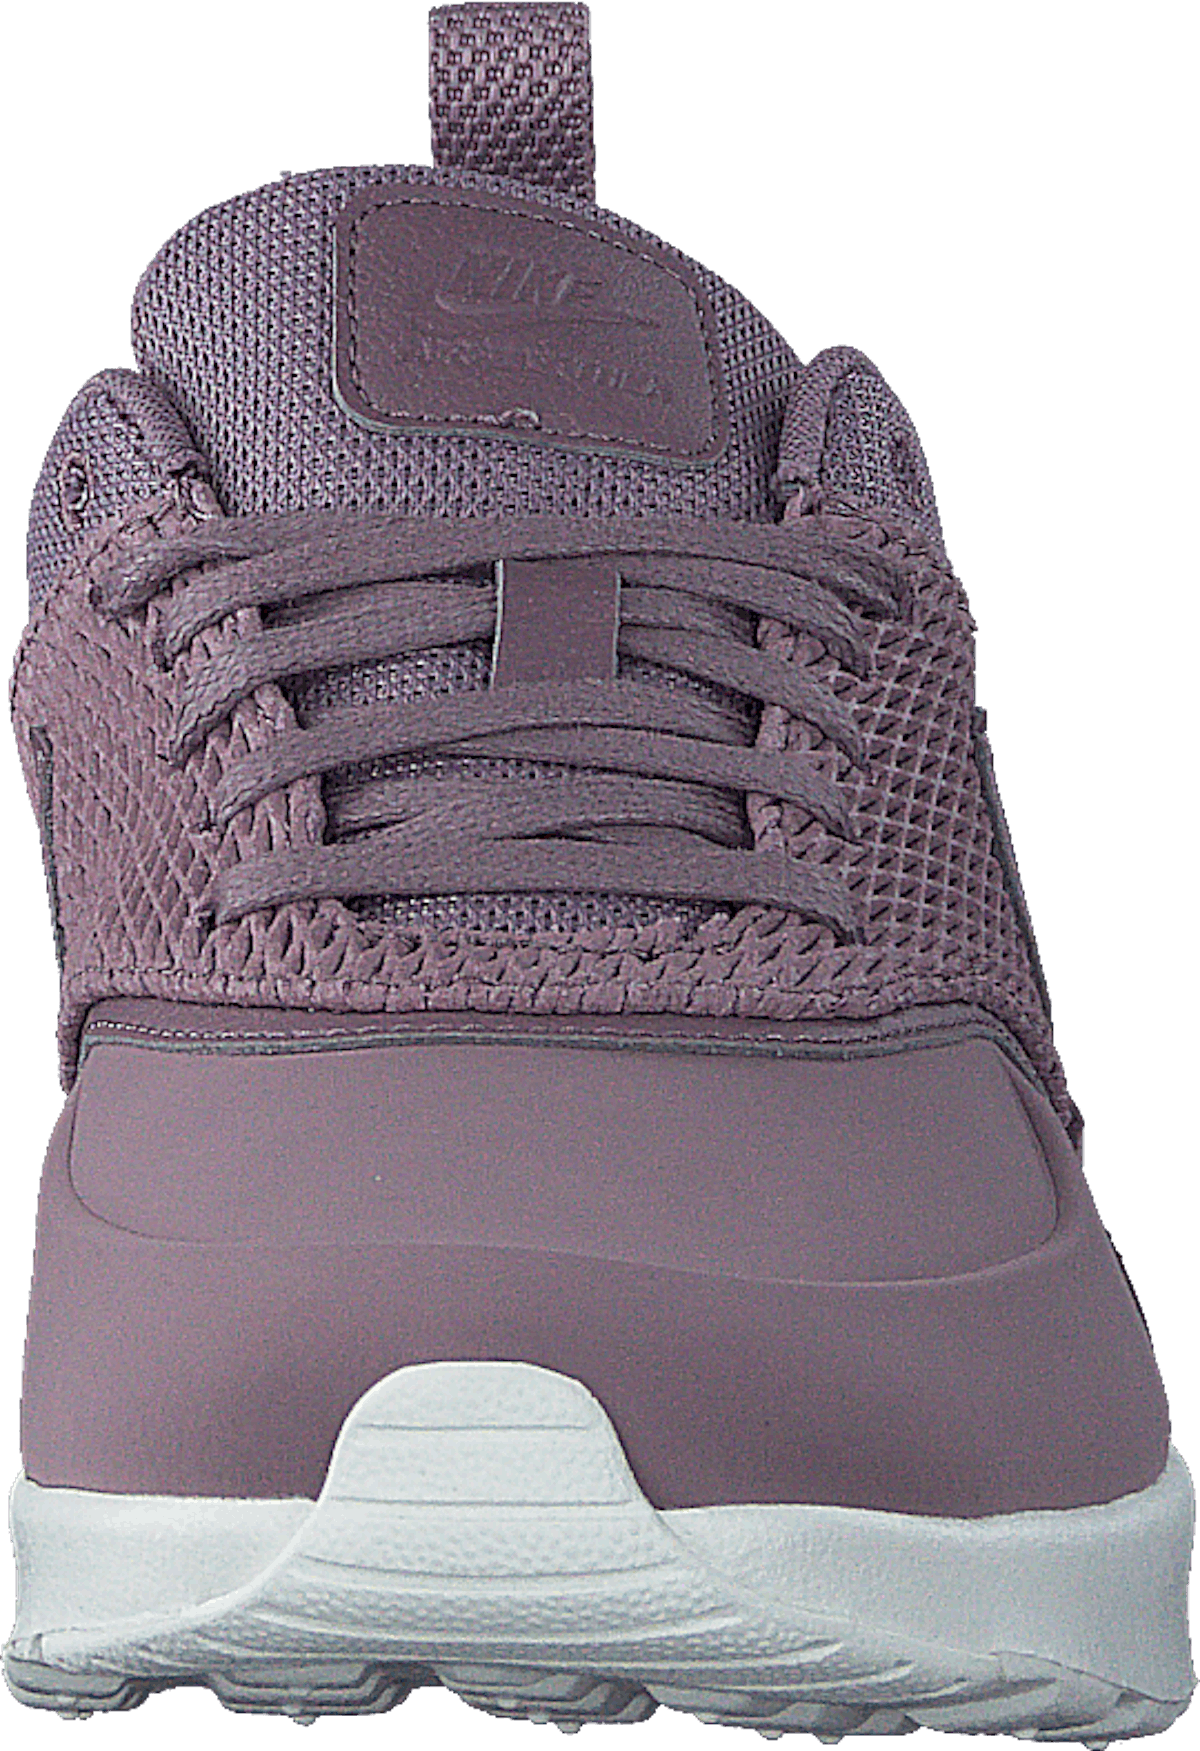 Wmns Air Max Thea Prm Lea Taupe Grey/Taupe Grey-Sail